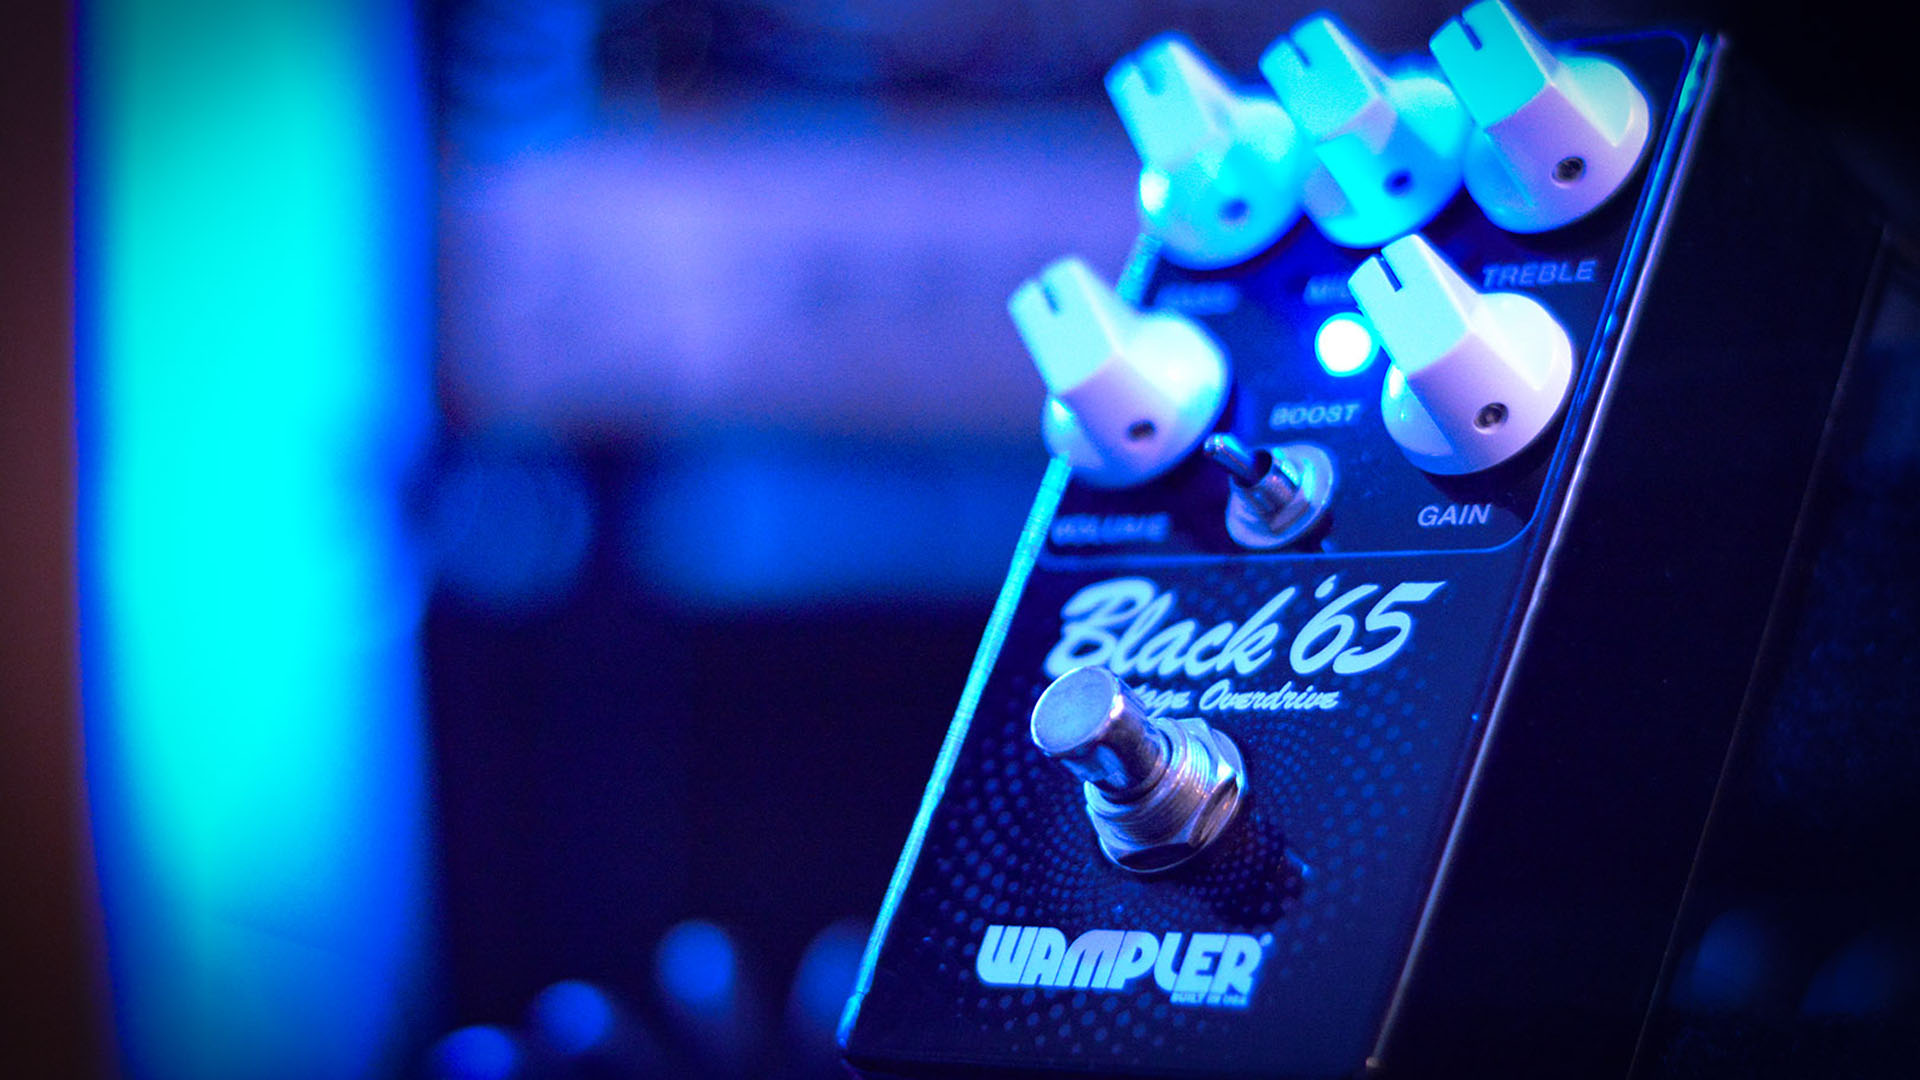 Black ’65 Limited Edition Pedal